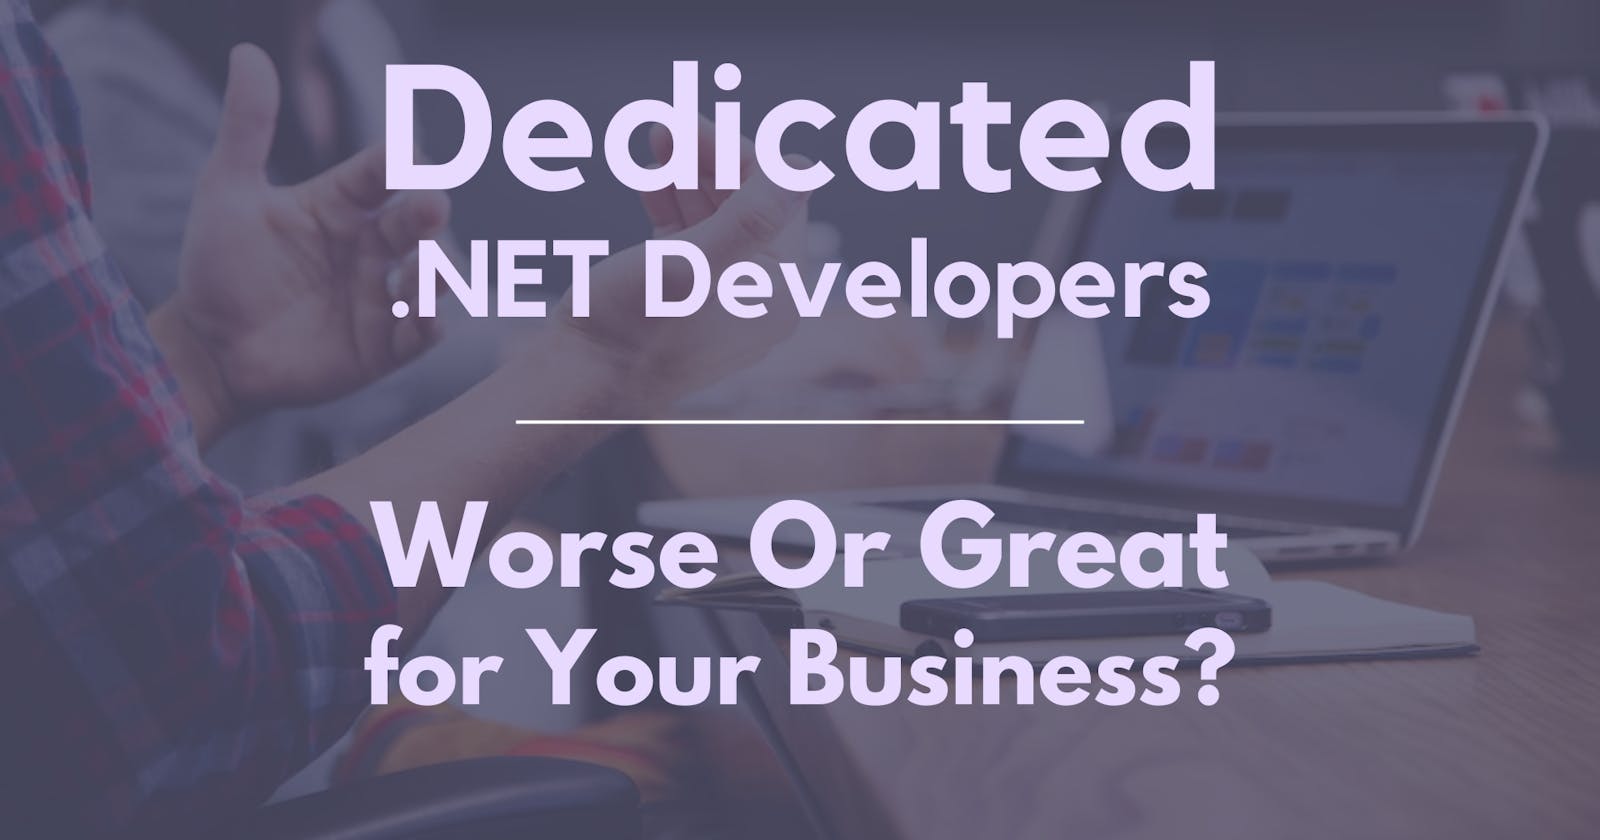 Dedicated .NET Developers: Worse or Great for Your Business? 😲